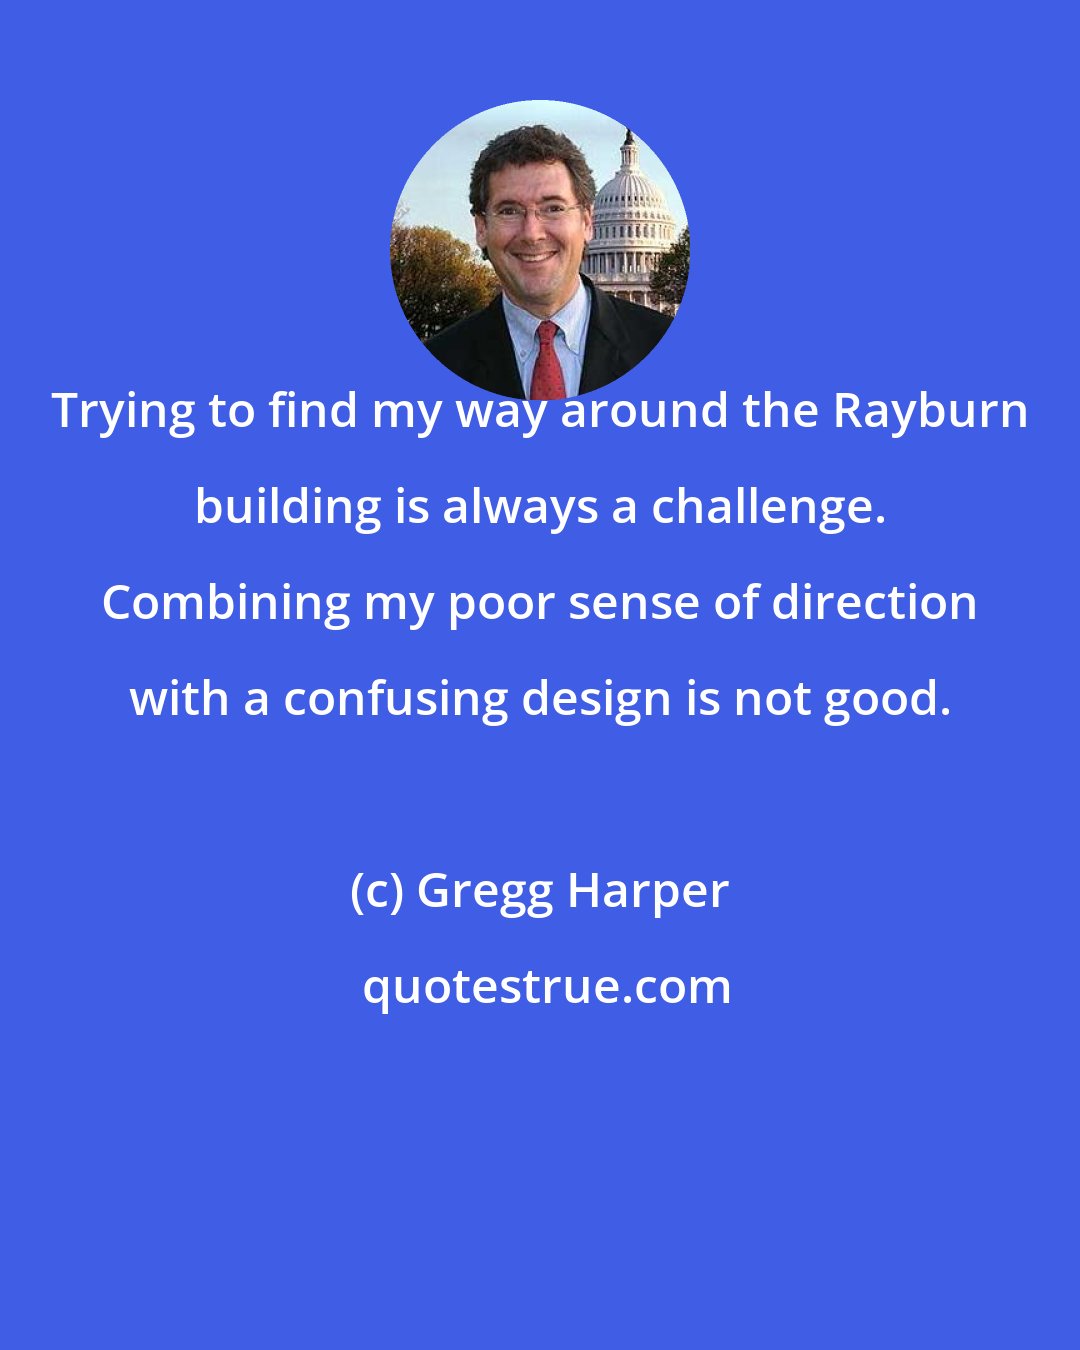 Gregg Harper: Trying to find my way around the Rayburn building is always a challenge. Combining my poor sense of direction with a confusing design is not good.